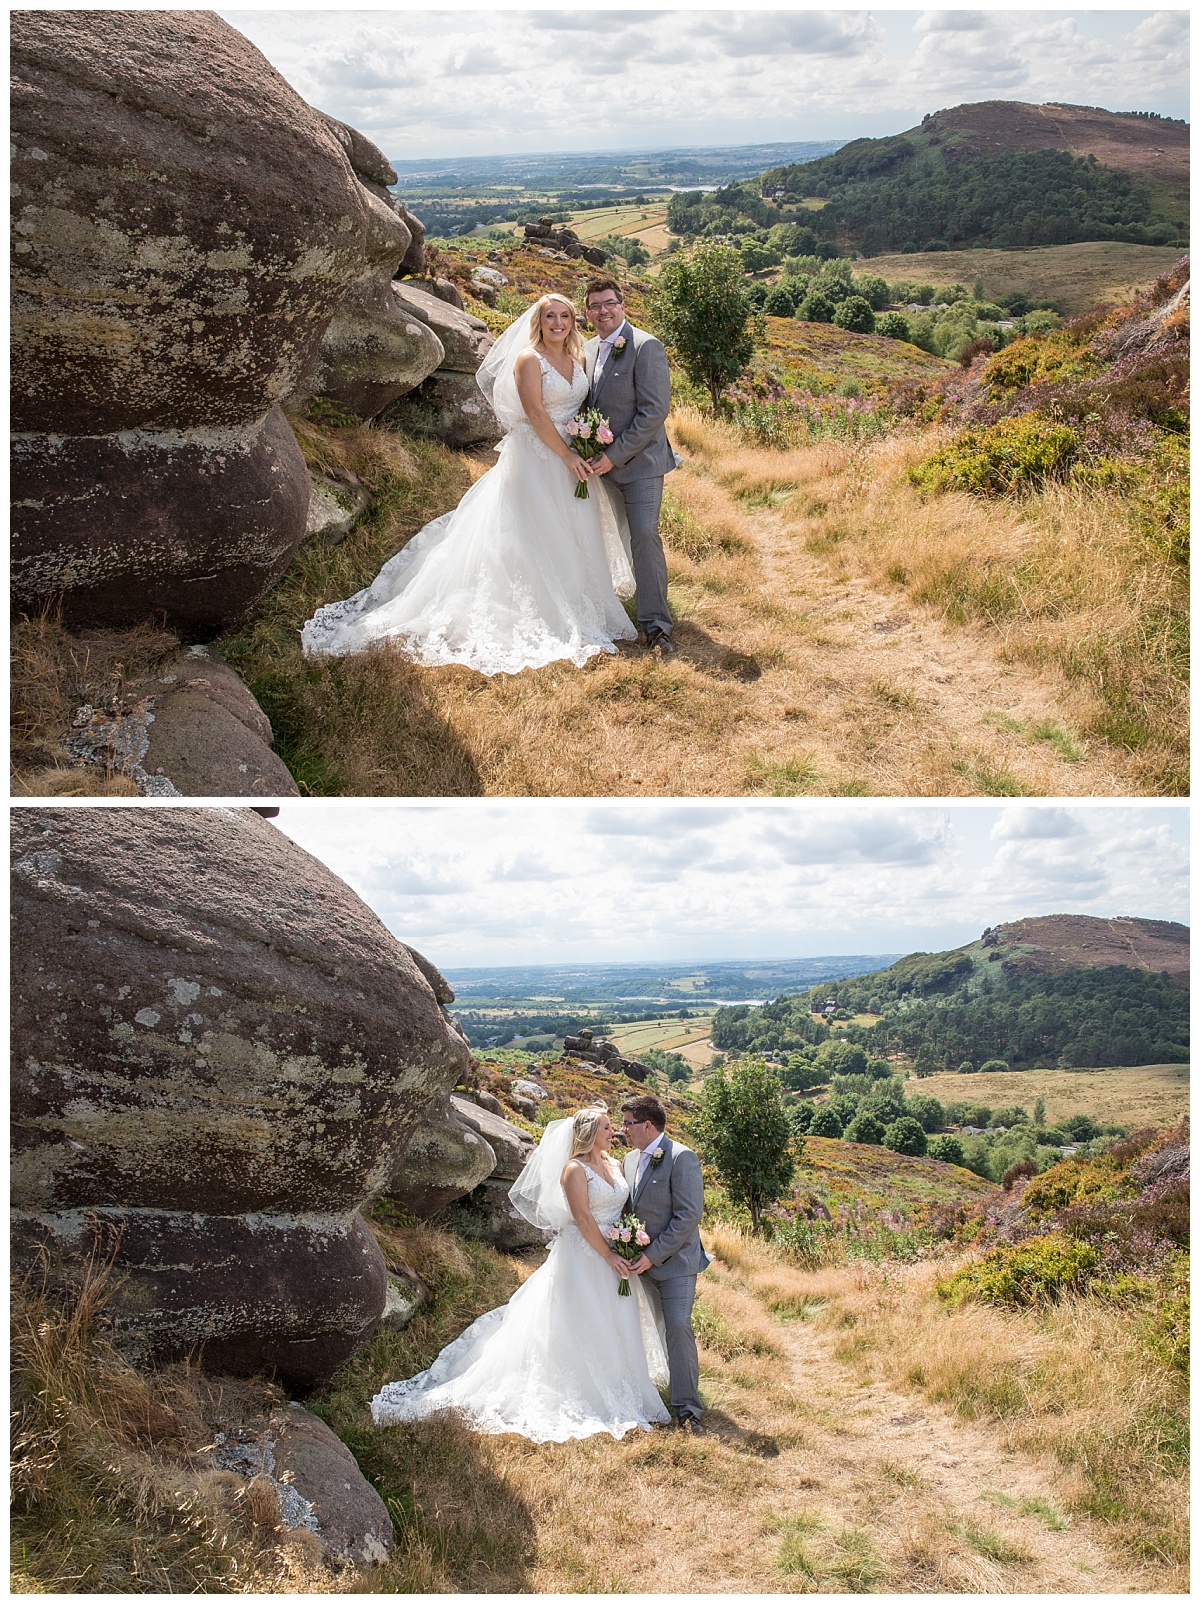 Wedding Photography Manchester - Lisa and James's The Three Horseshoes Country Inn wedding 27